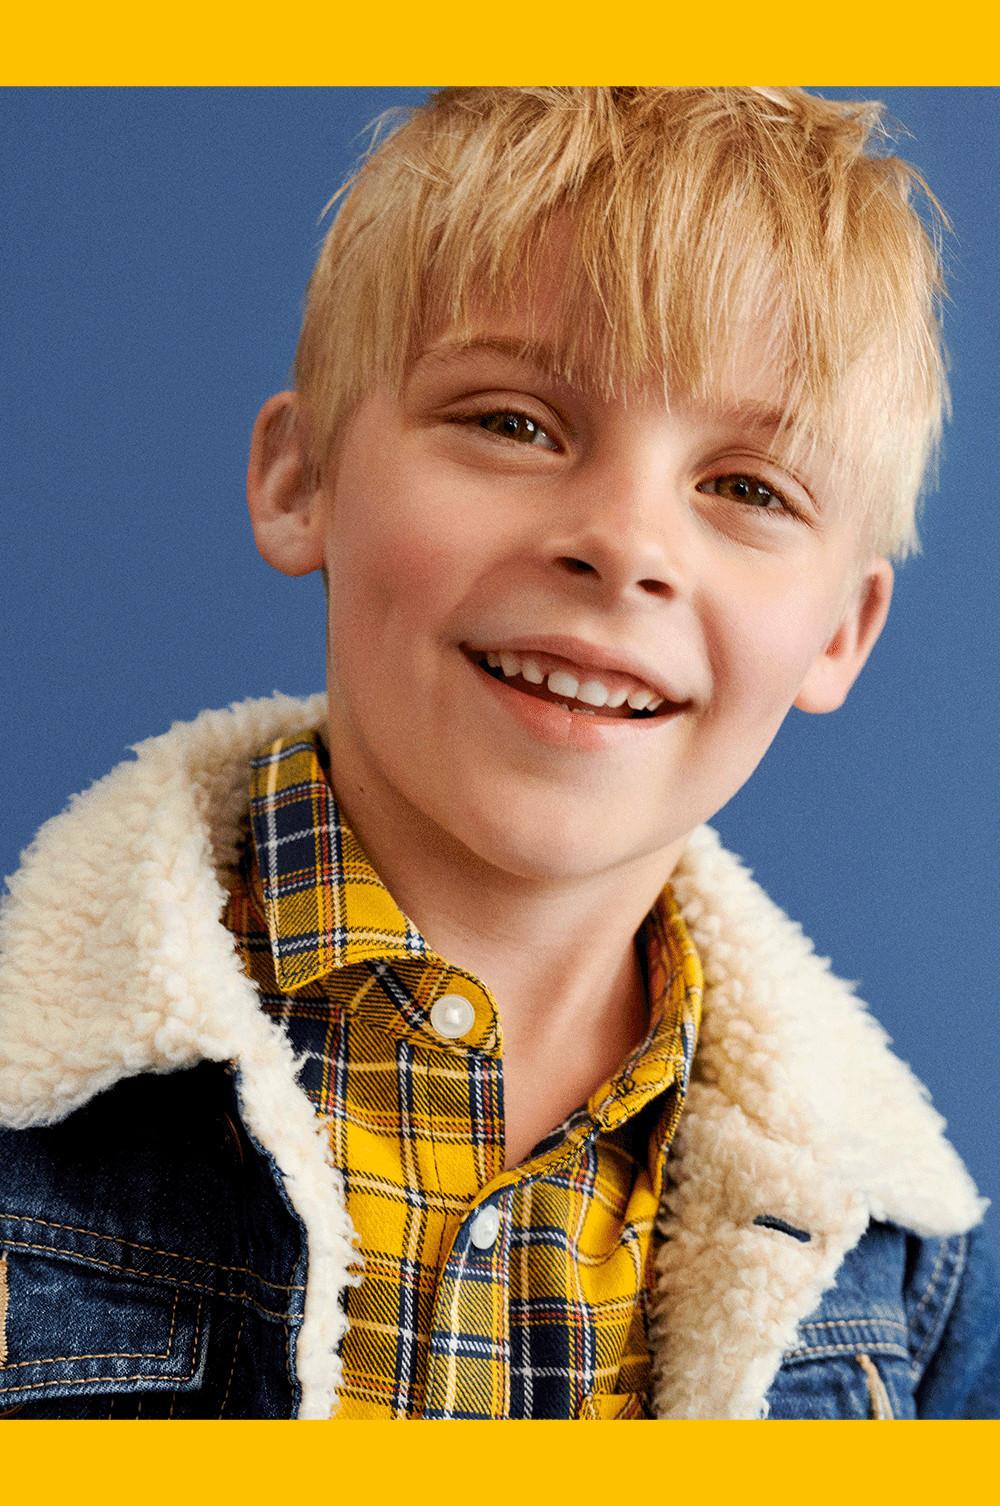 child in a denim jacket and yellow shirt